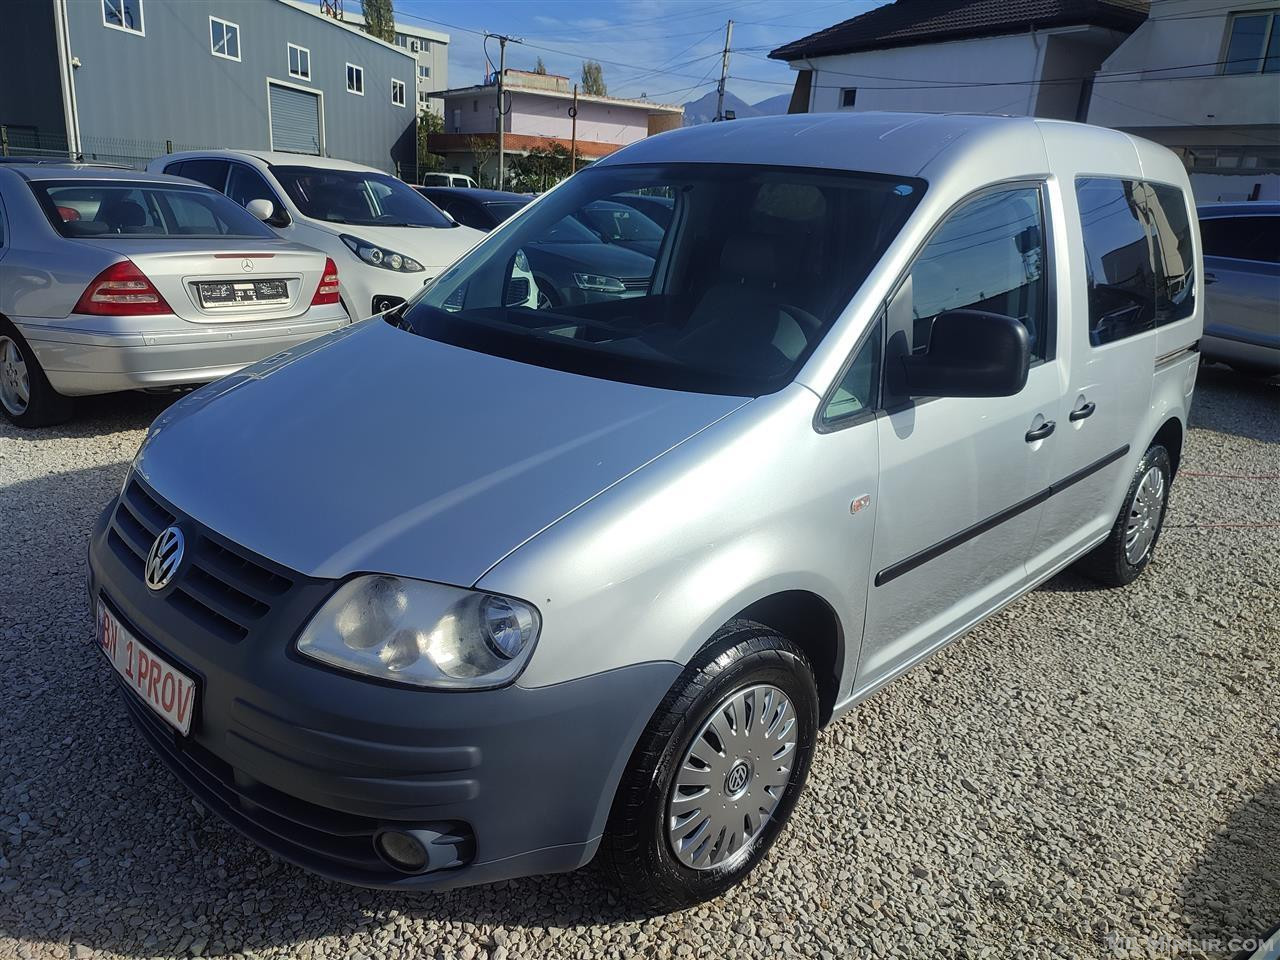 VW Caddy 1.9  NAFTE MANUALE 2009